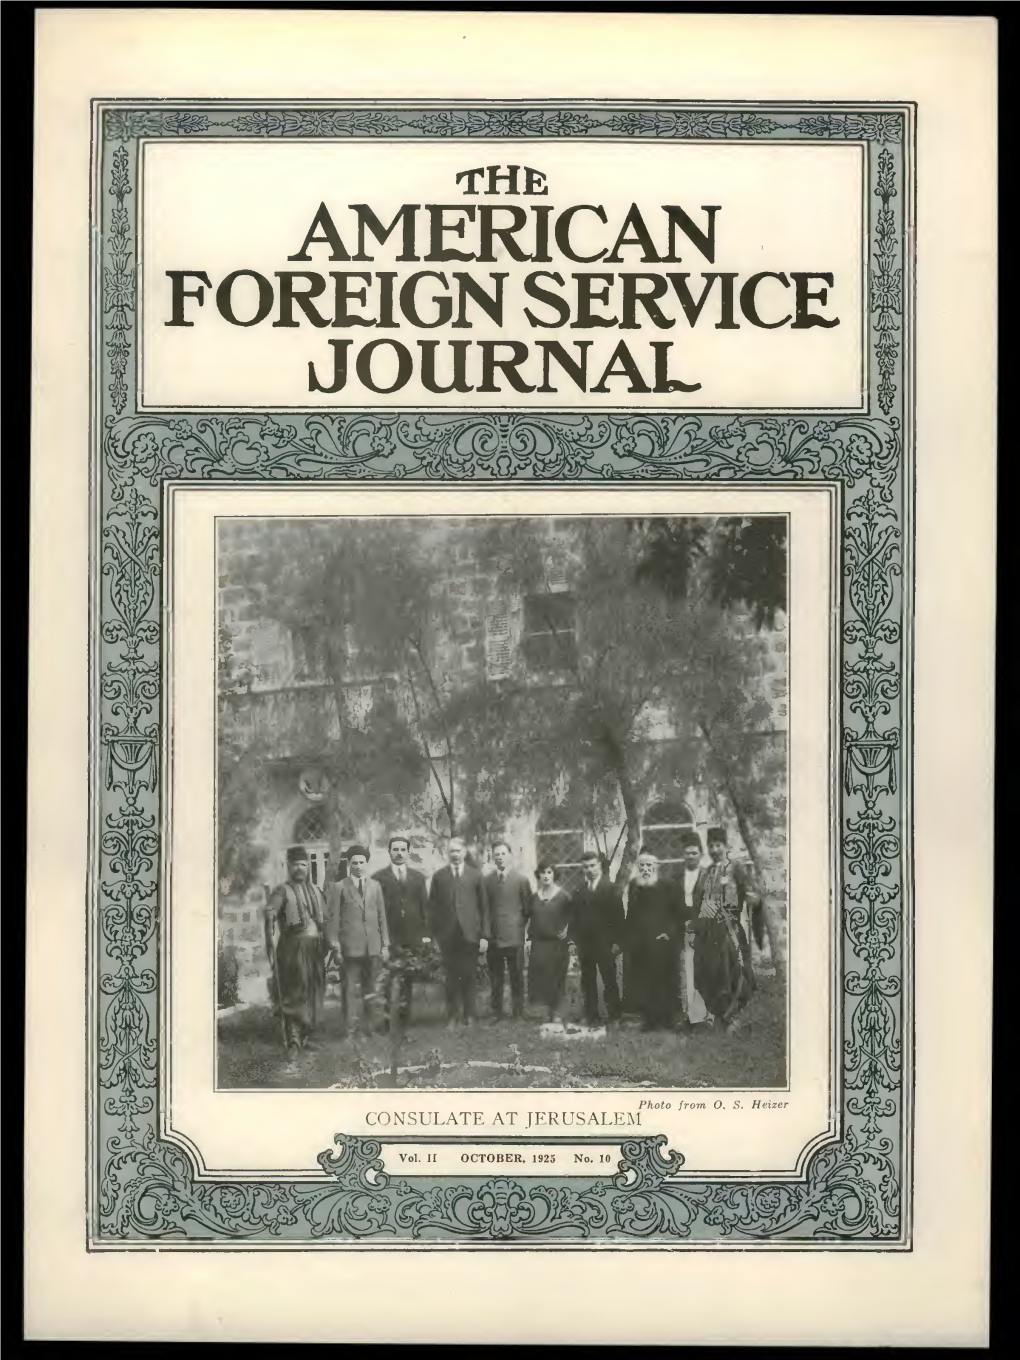 The Foreign Service Journal, October 1925